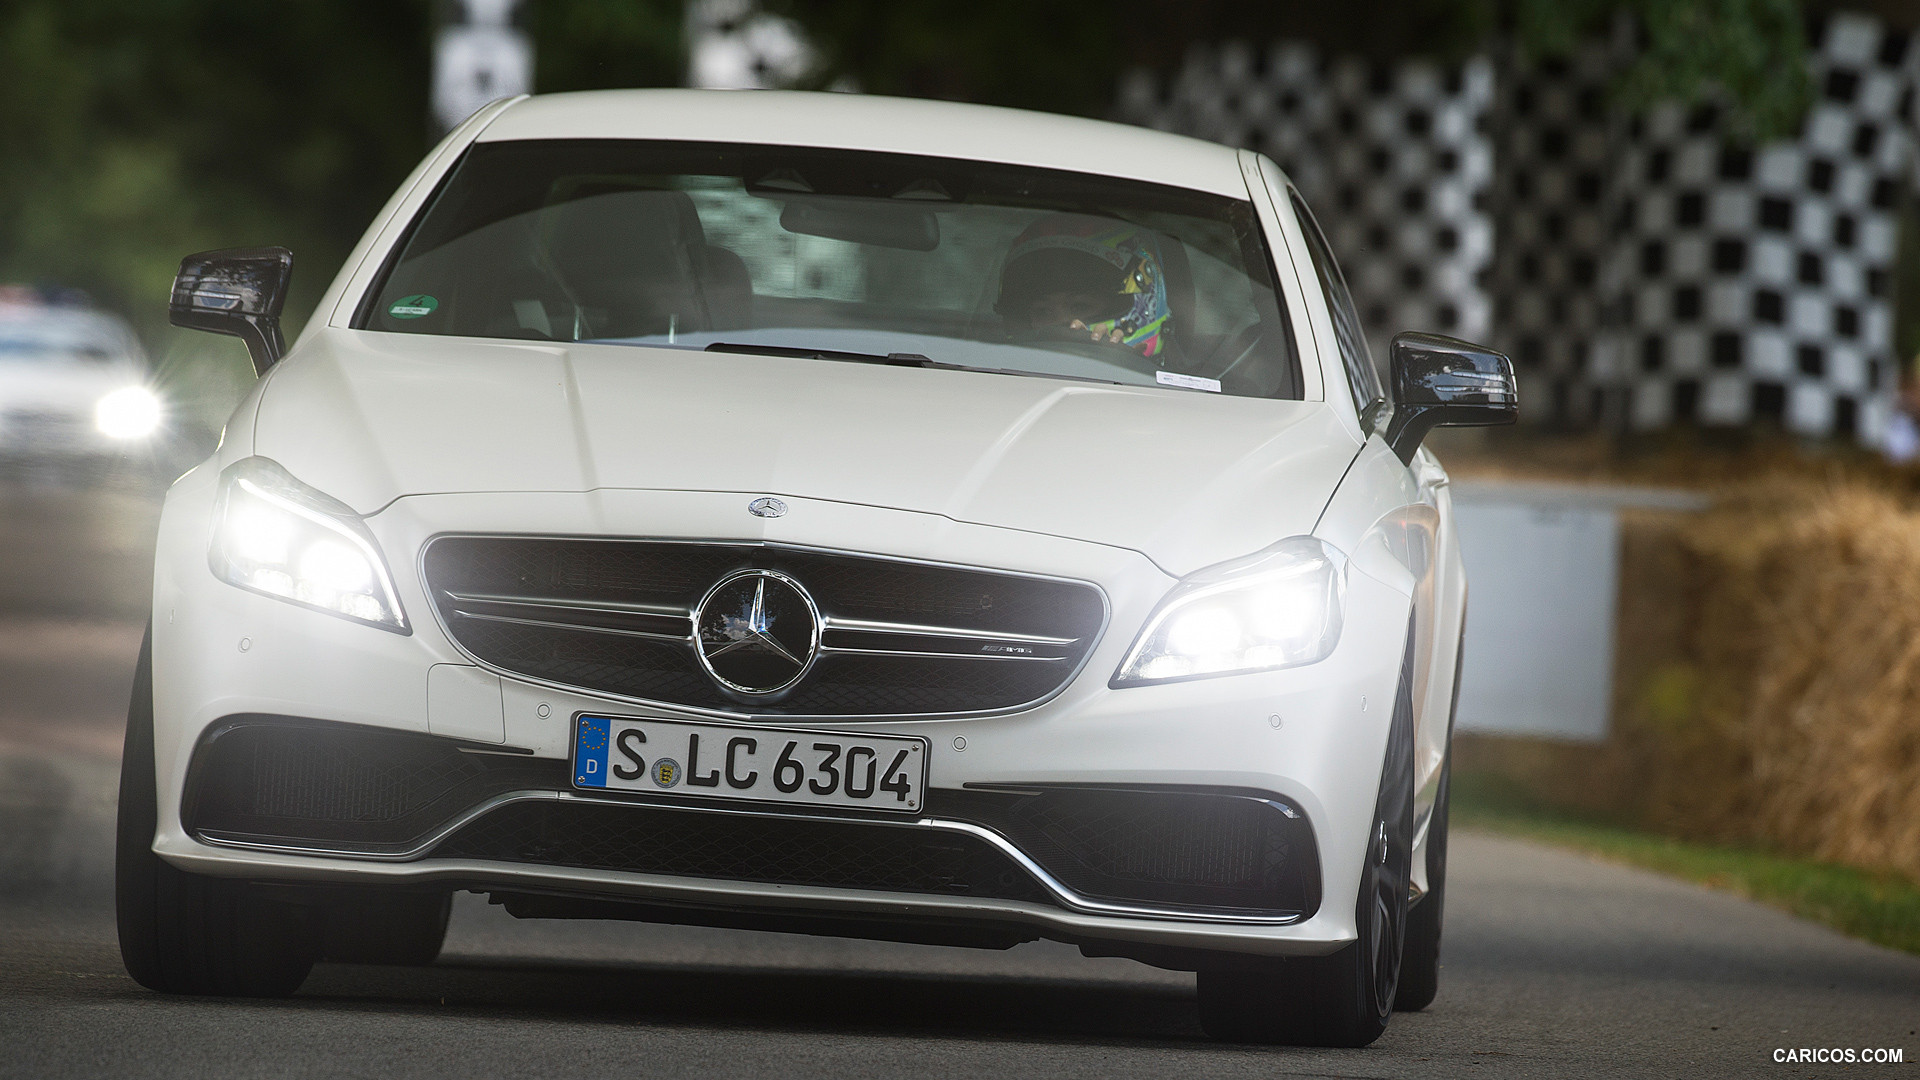 2015 Mercedes-Benz CLS 63 AMG S-Model - Front, #1 of 51